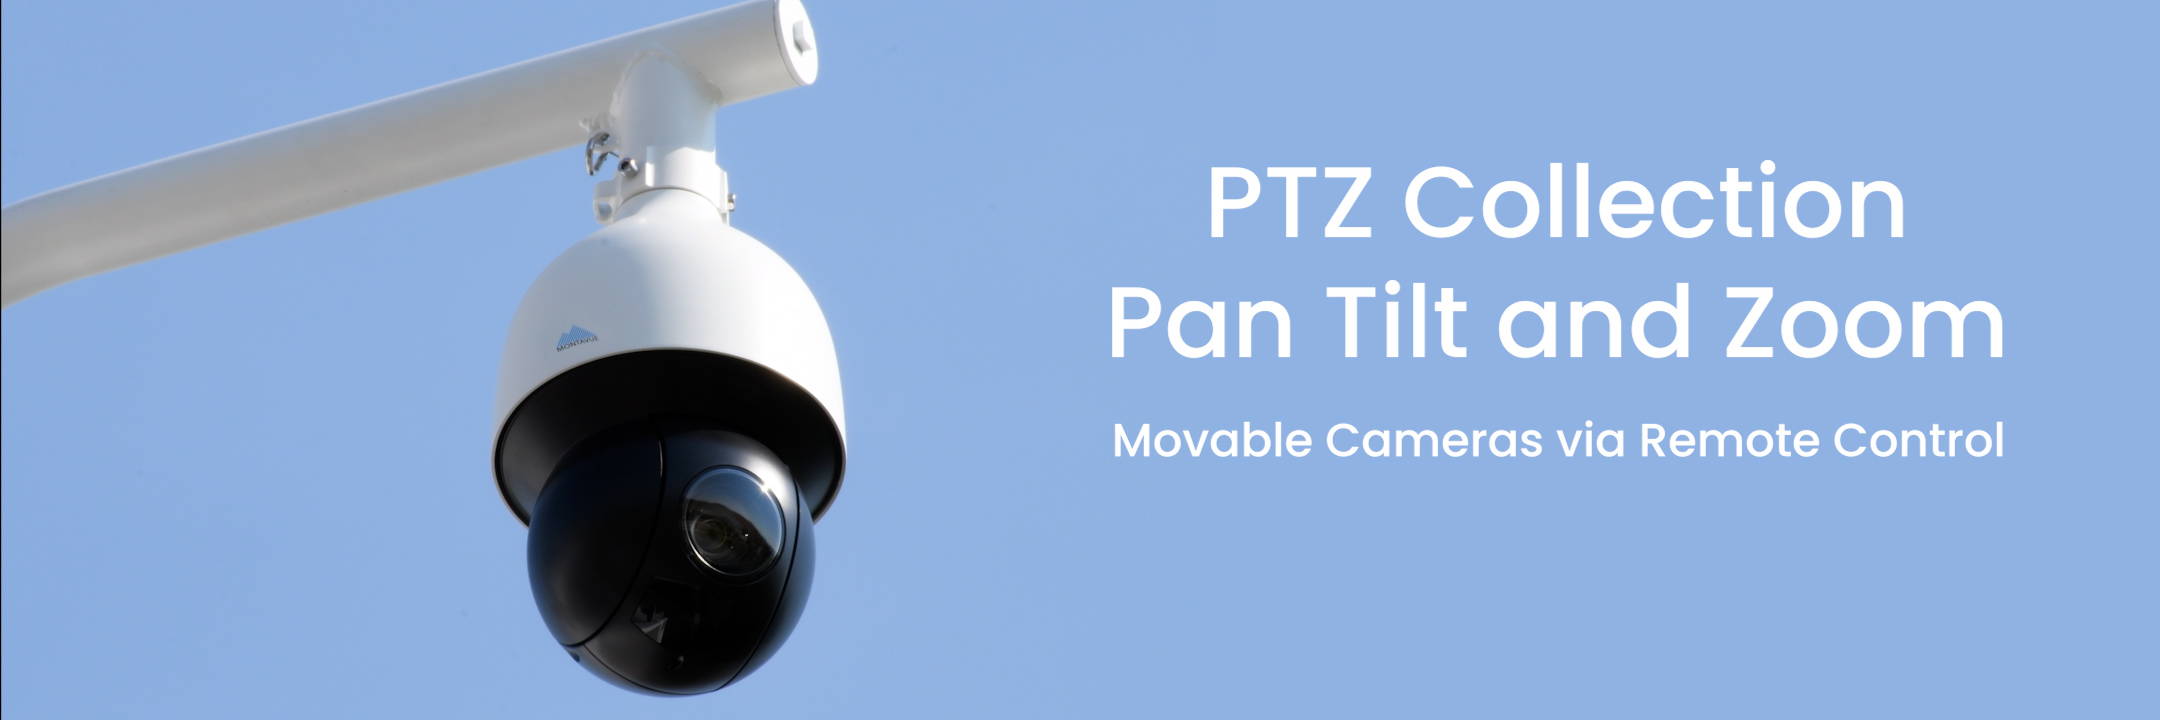 Pan tilt and zoom security cameras